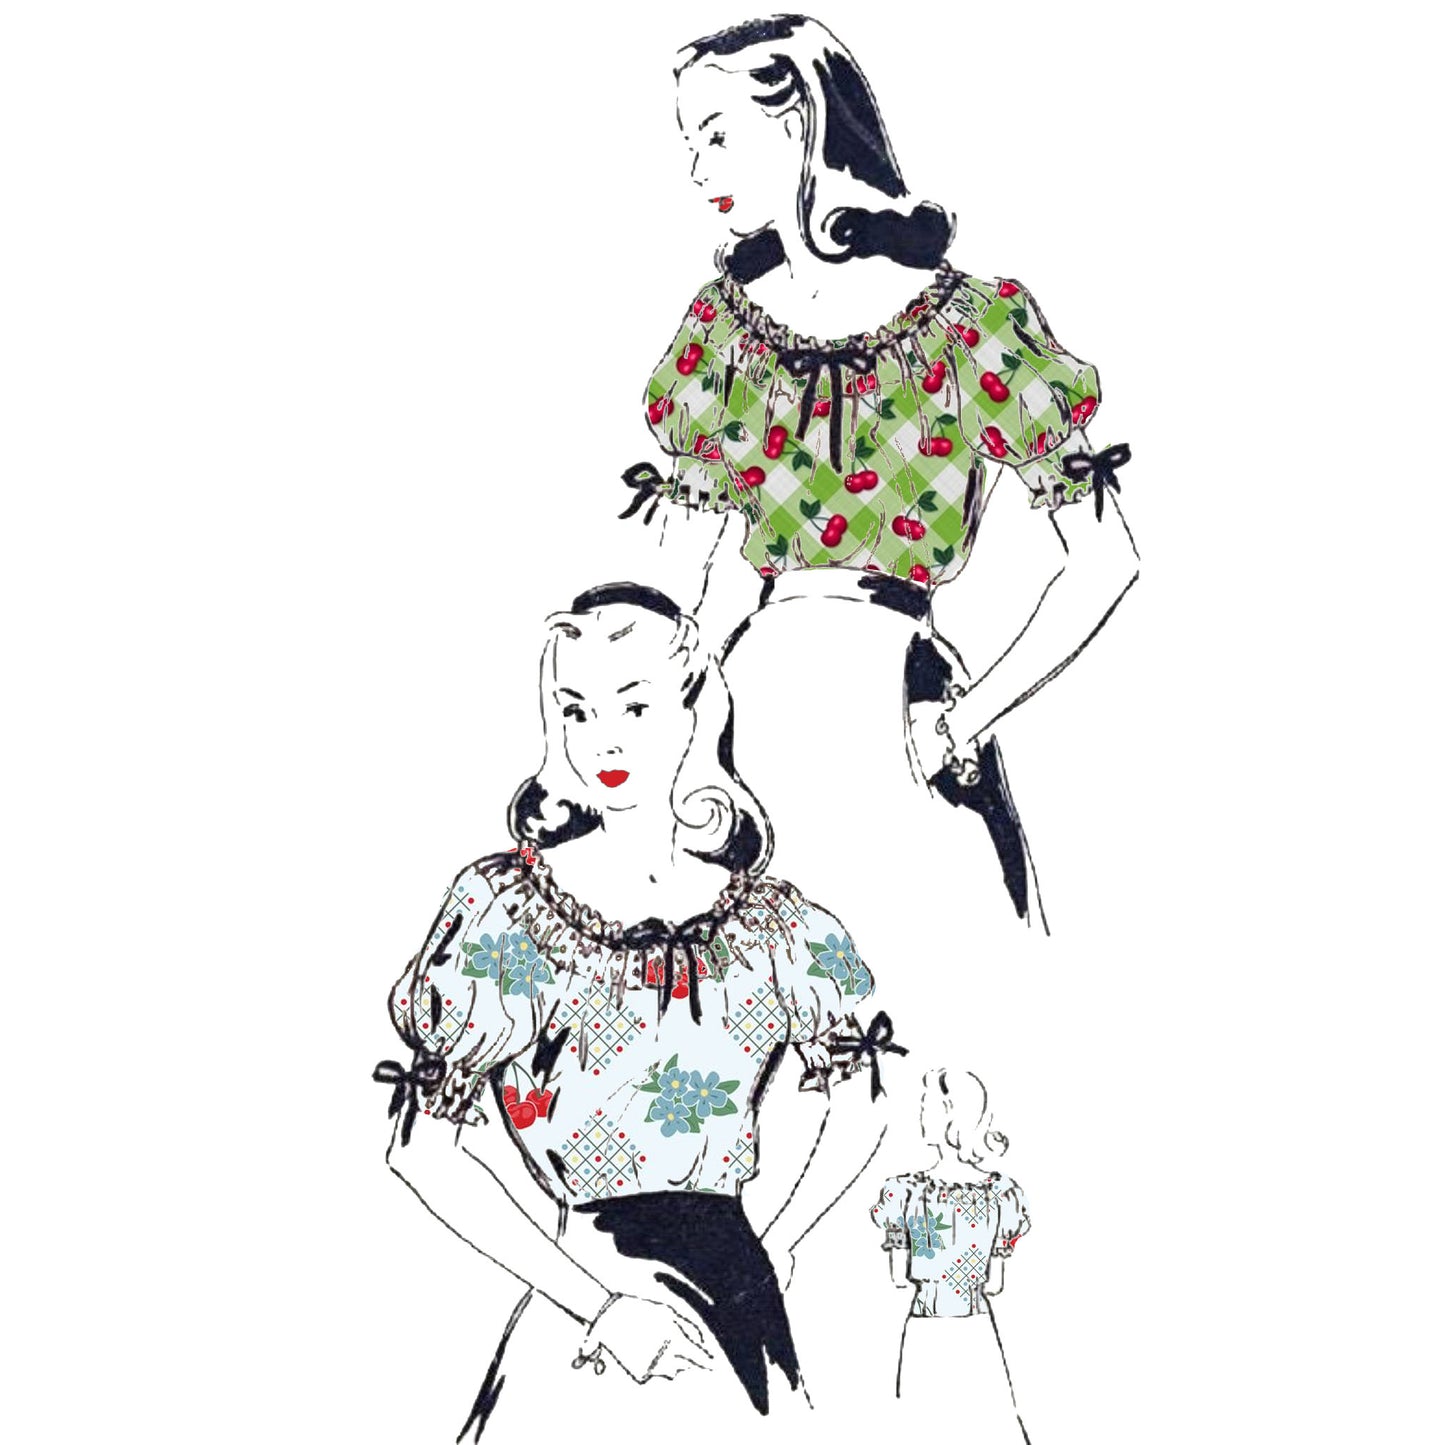 Illustration, two women face forwards wearing blouse, and one woman facing backwards wearing blouse.